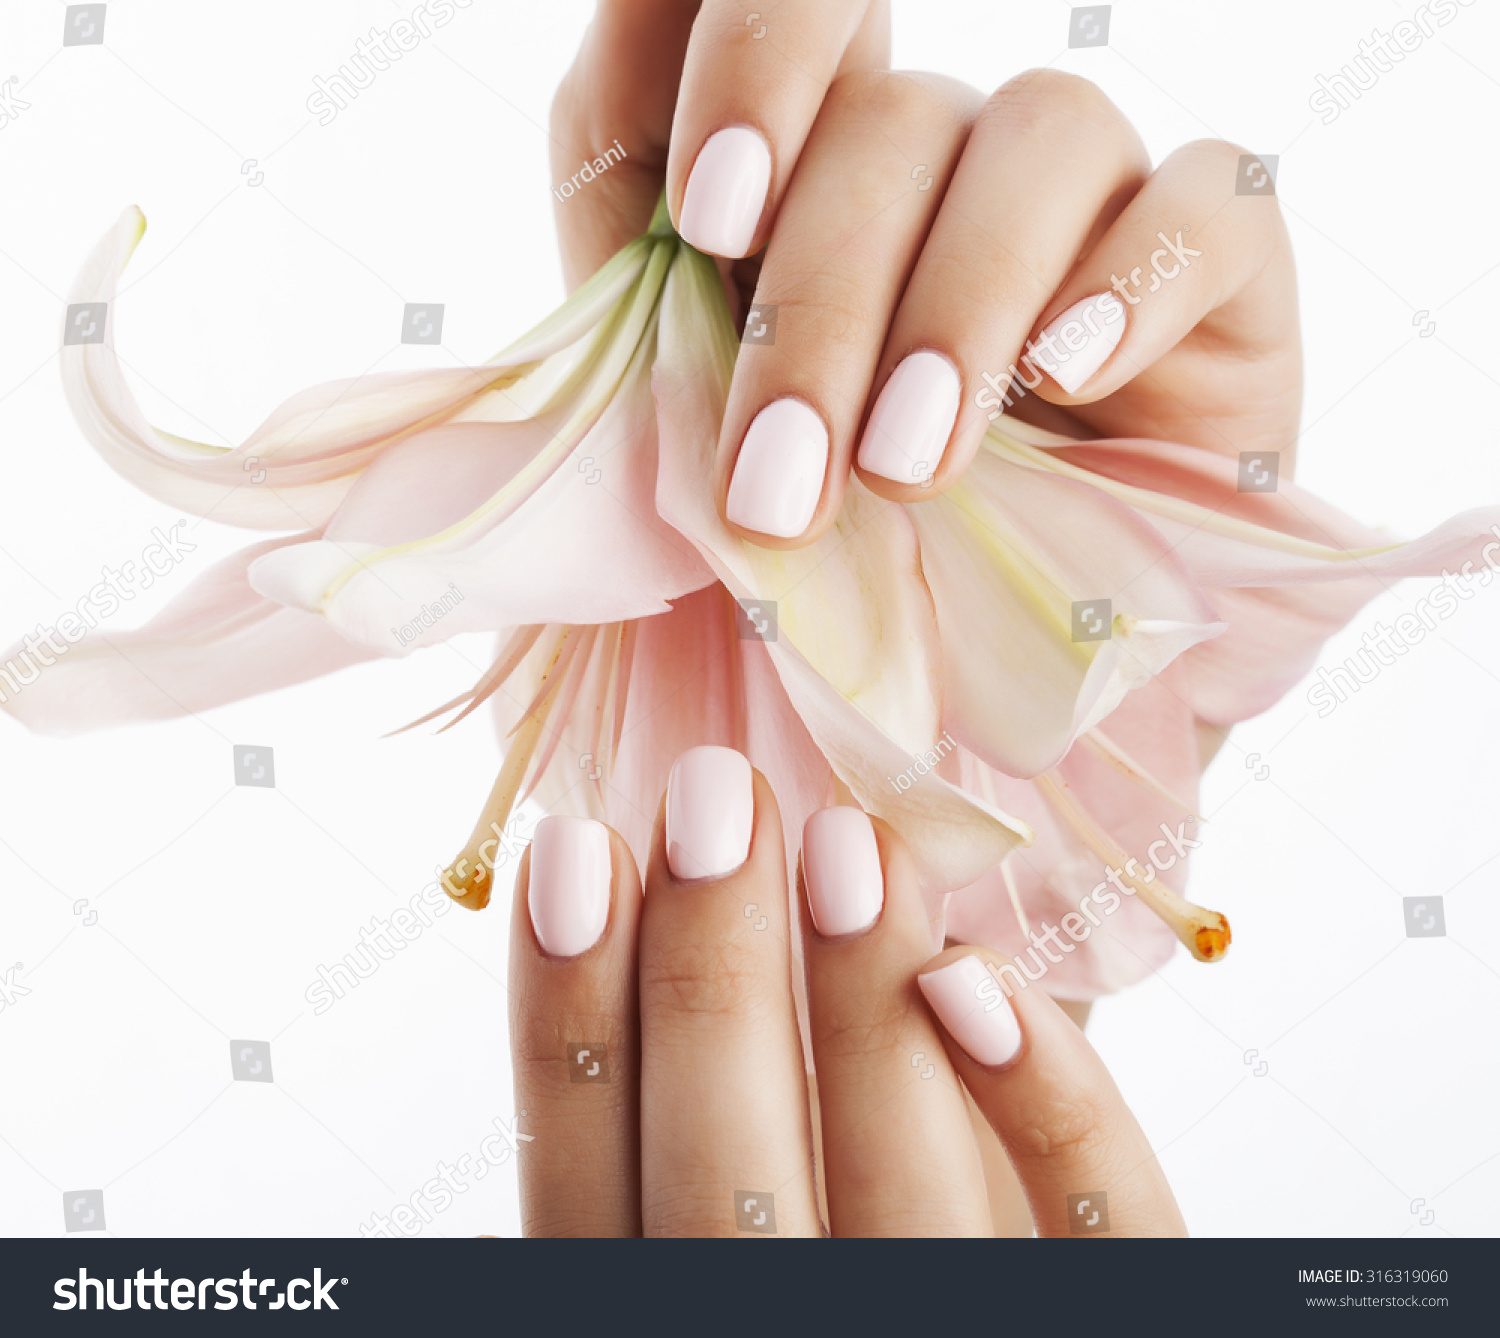 beauty delicate hands with manicure holding flower lily close up isolated on white #316319060